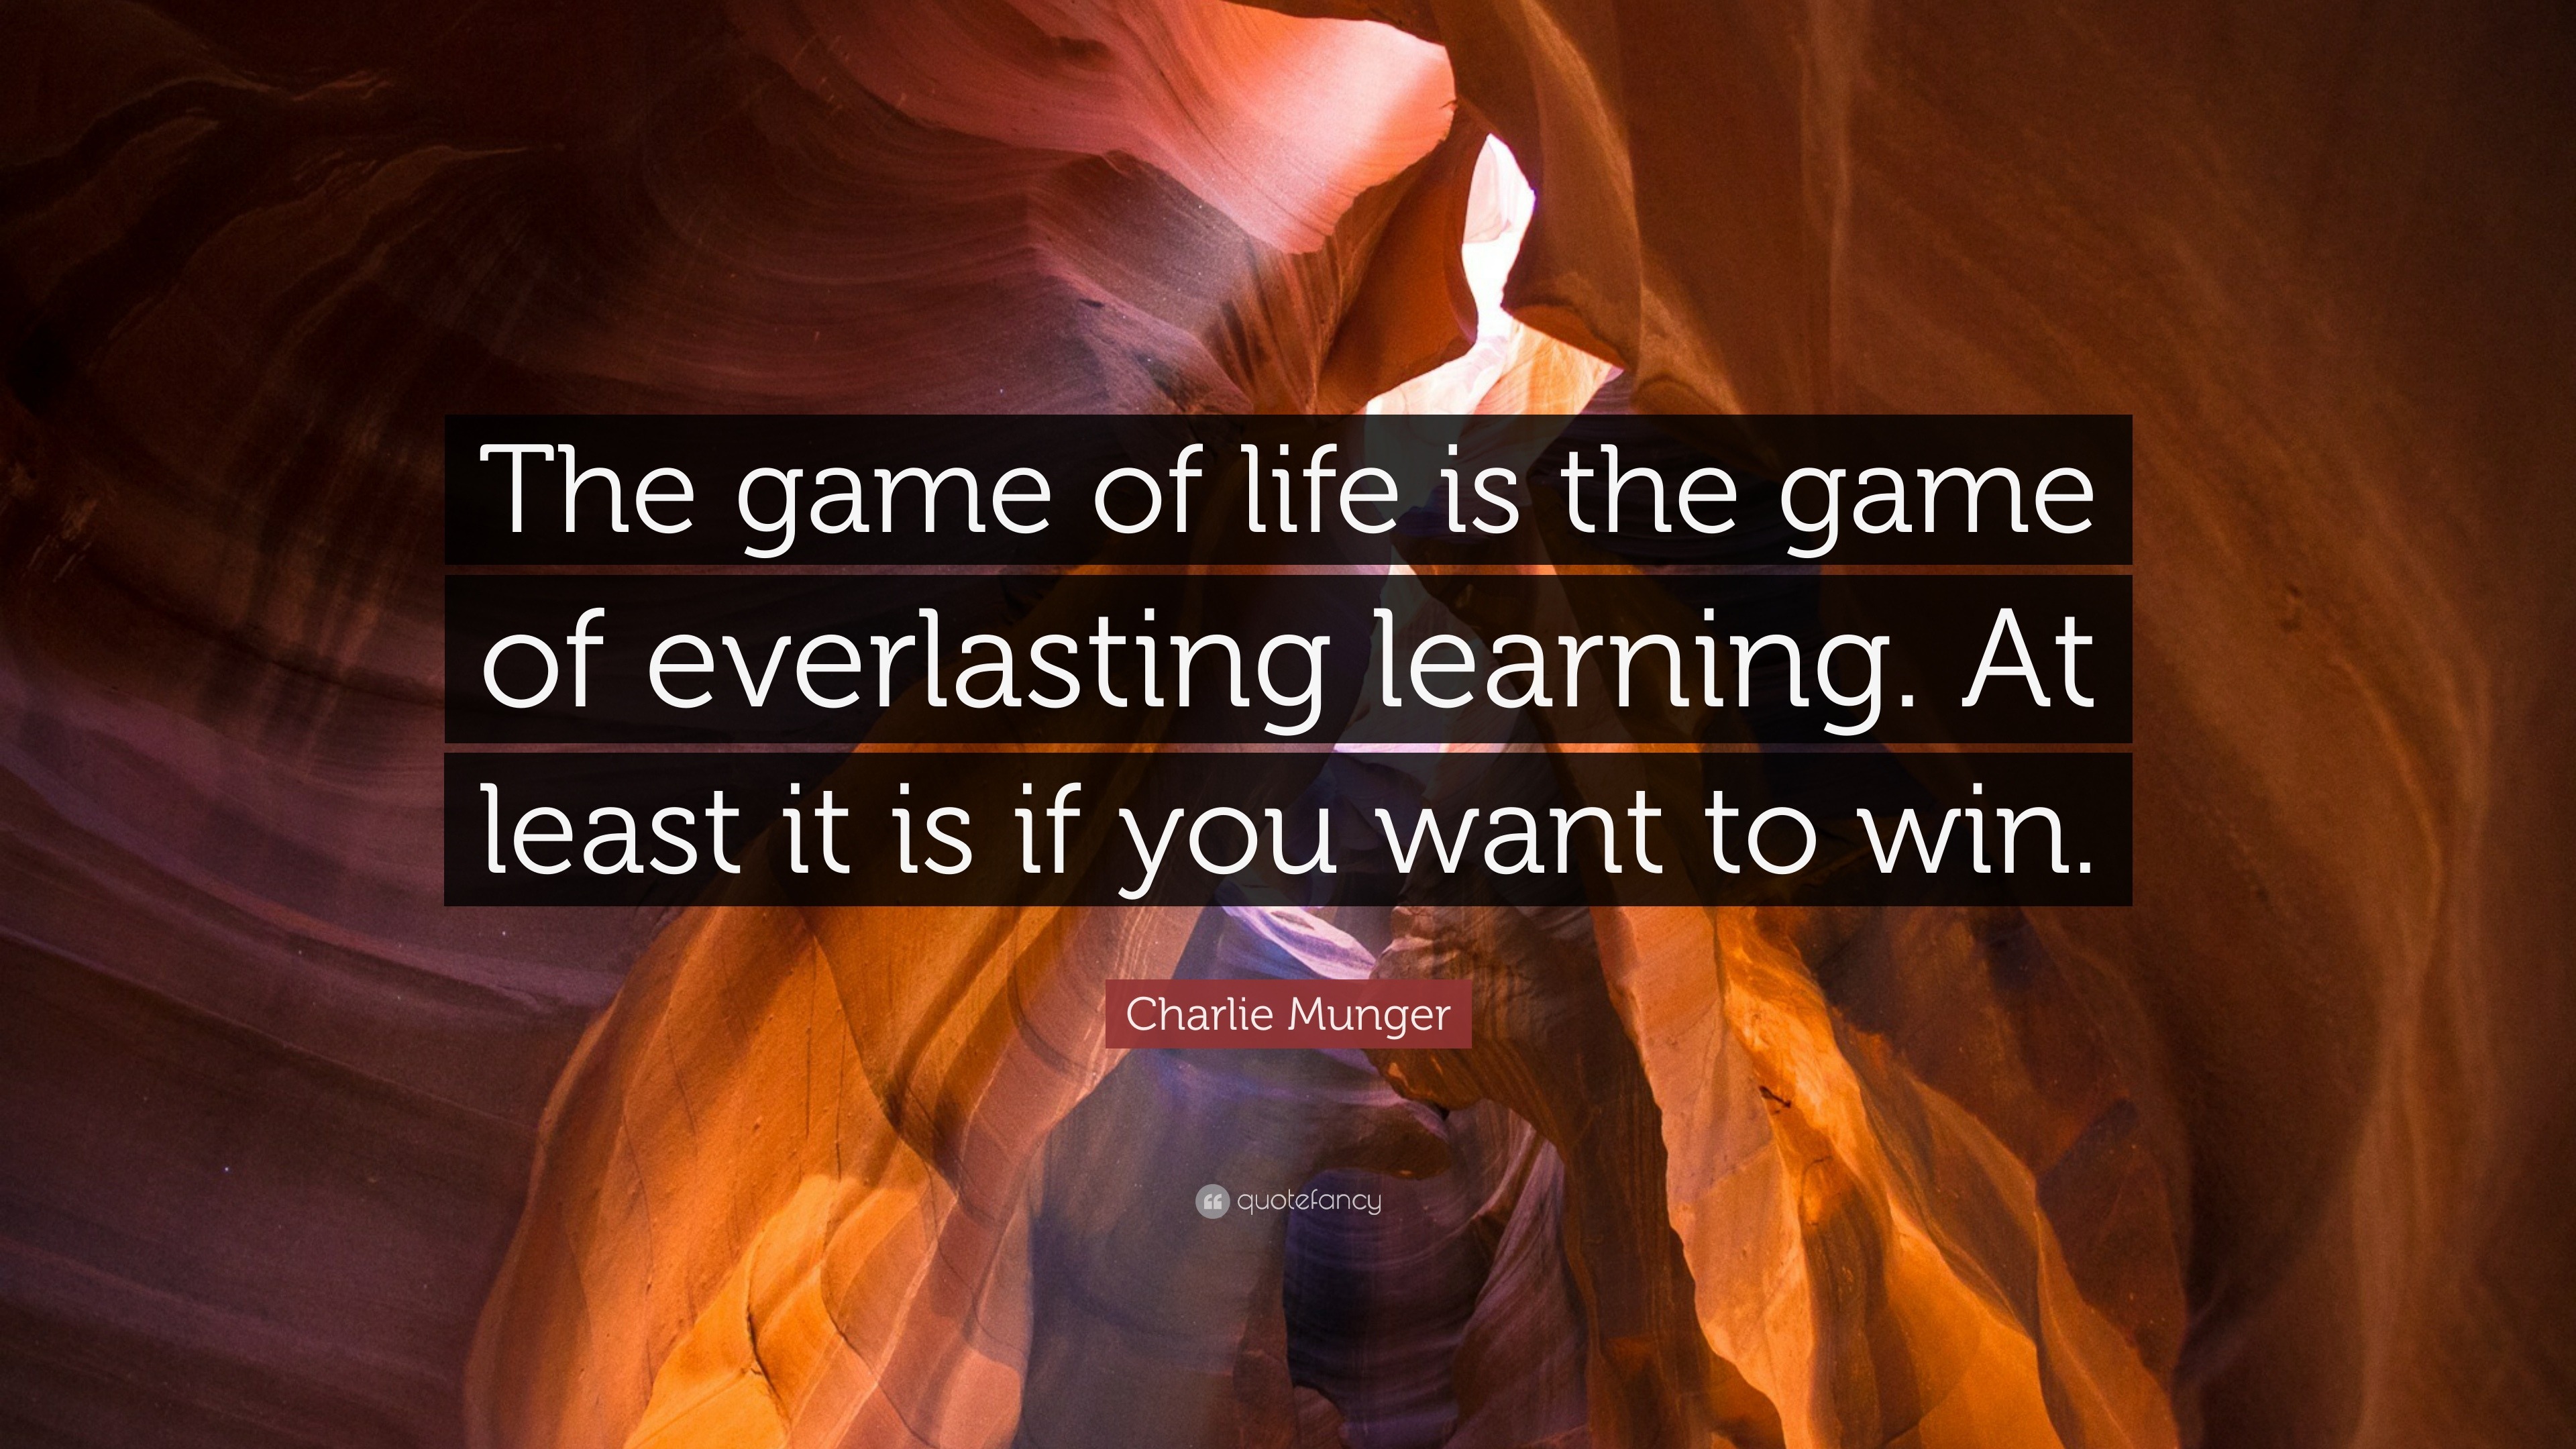 Life Is A Game And Everyone Can Win - Motivational Video